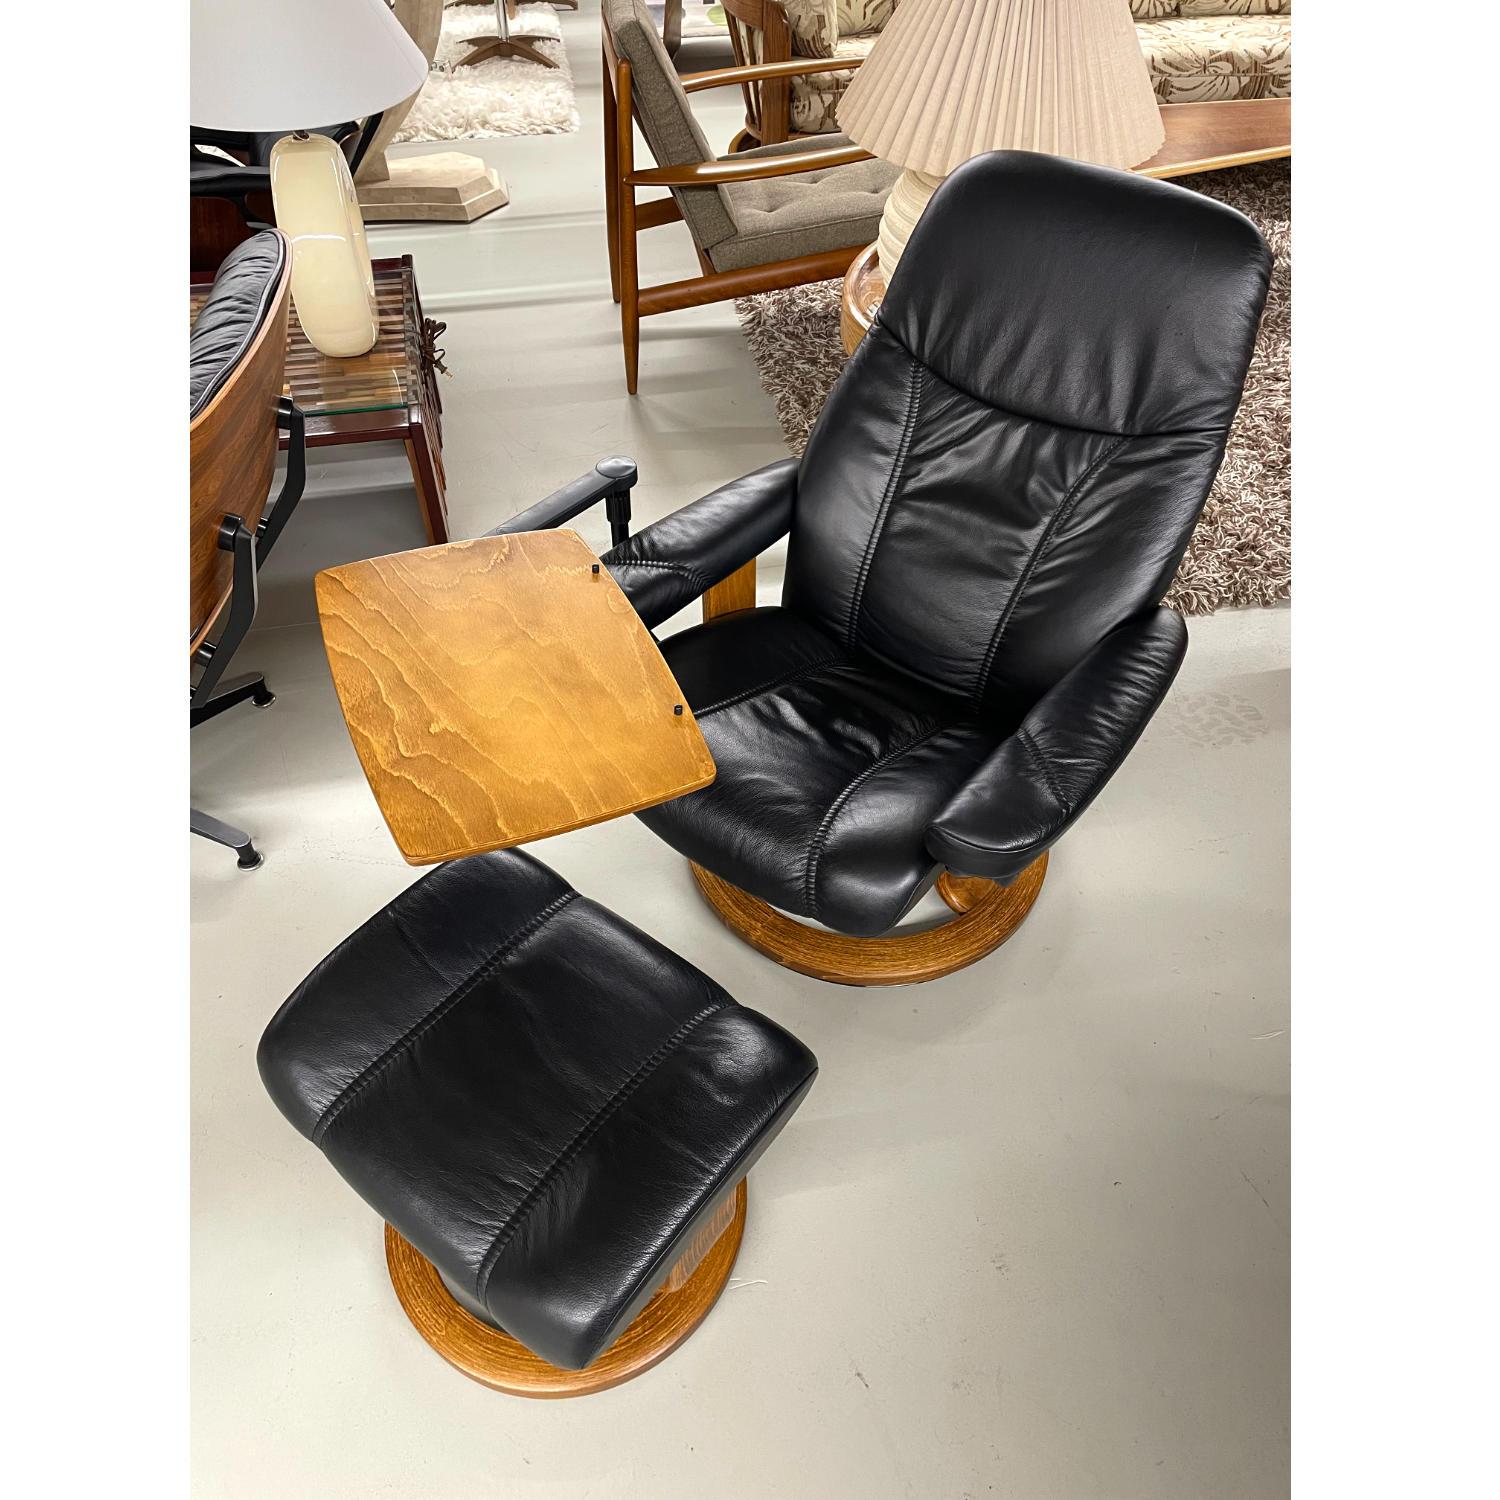 Norwegian Black Leather Ekornes Stressless Recliner with Ottoman and Telescoping Table